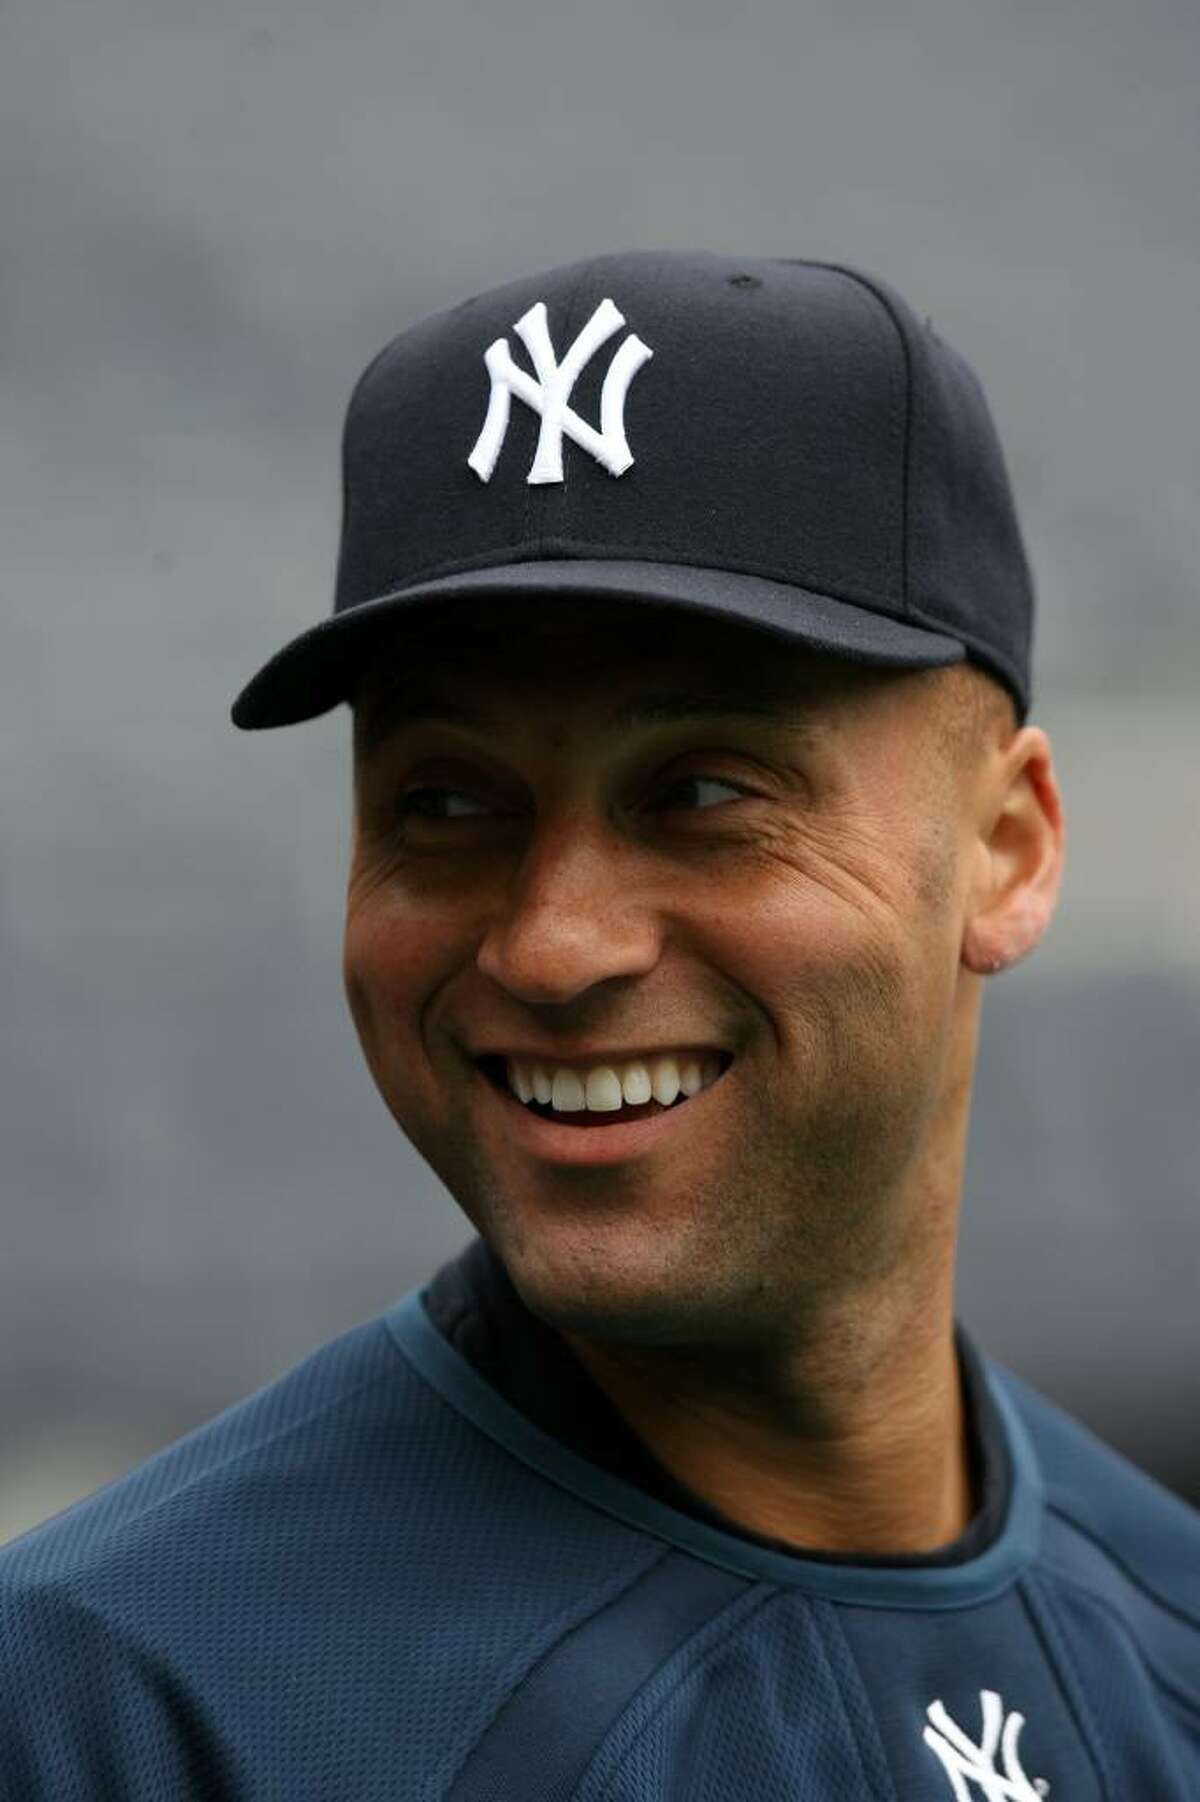 NEW YORK - APRIL 13: Derek Jeter #2 of the New York Yankees looks on during batting practice before playing agianst the Los Angeles Angels of Anaheim during the Yankees home opener at Yankee Stadium on April 13, 2010 in the Bronx borough of New York City. (Photo by Chris Trotman/Getty Images) *** Local Caption *** Derek Jeter